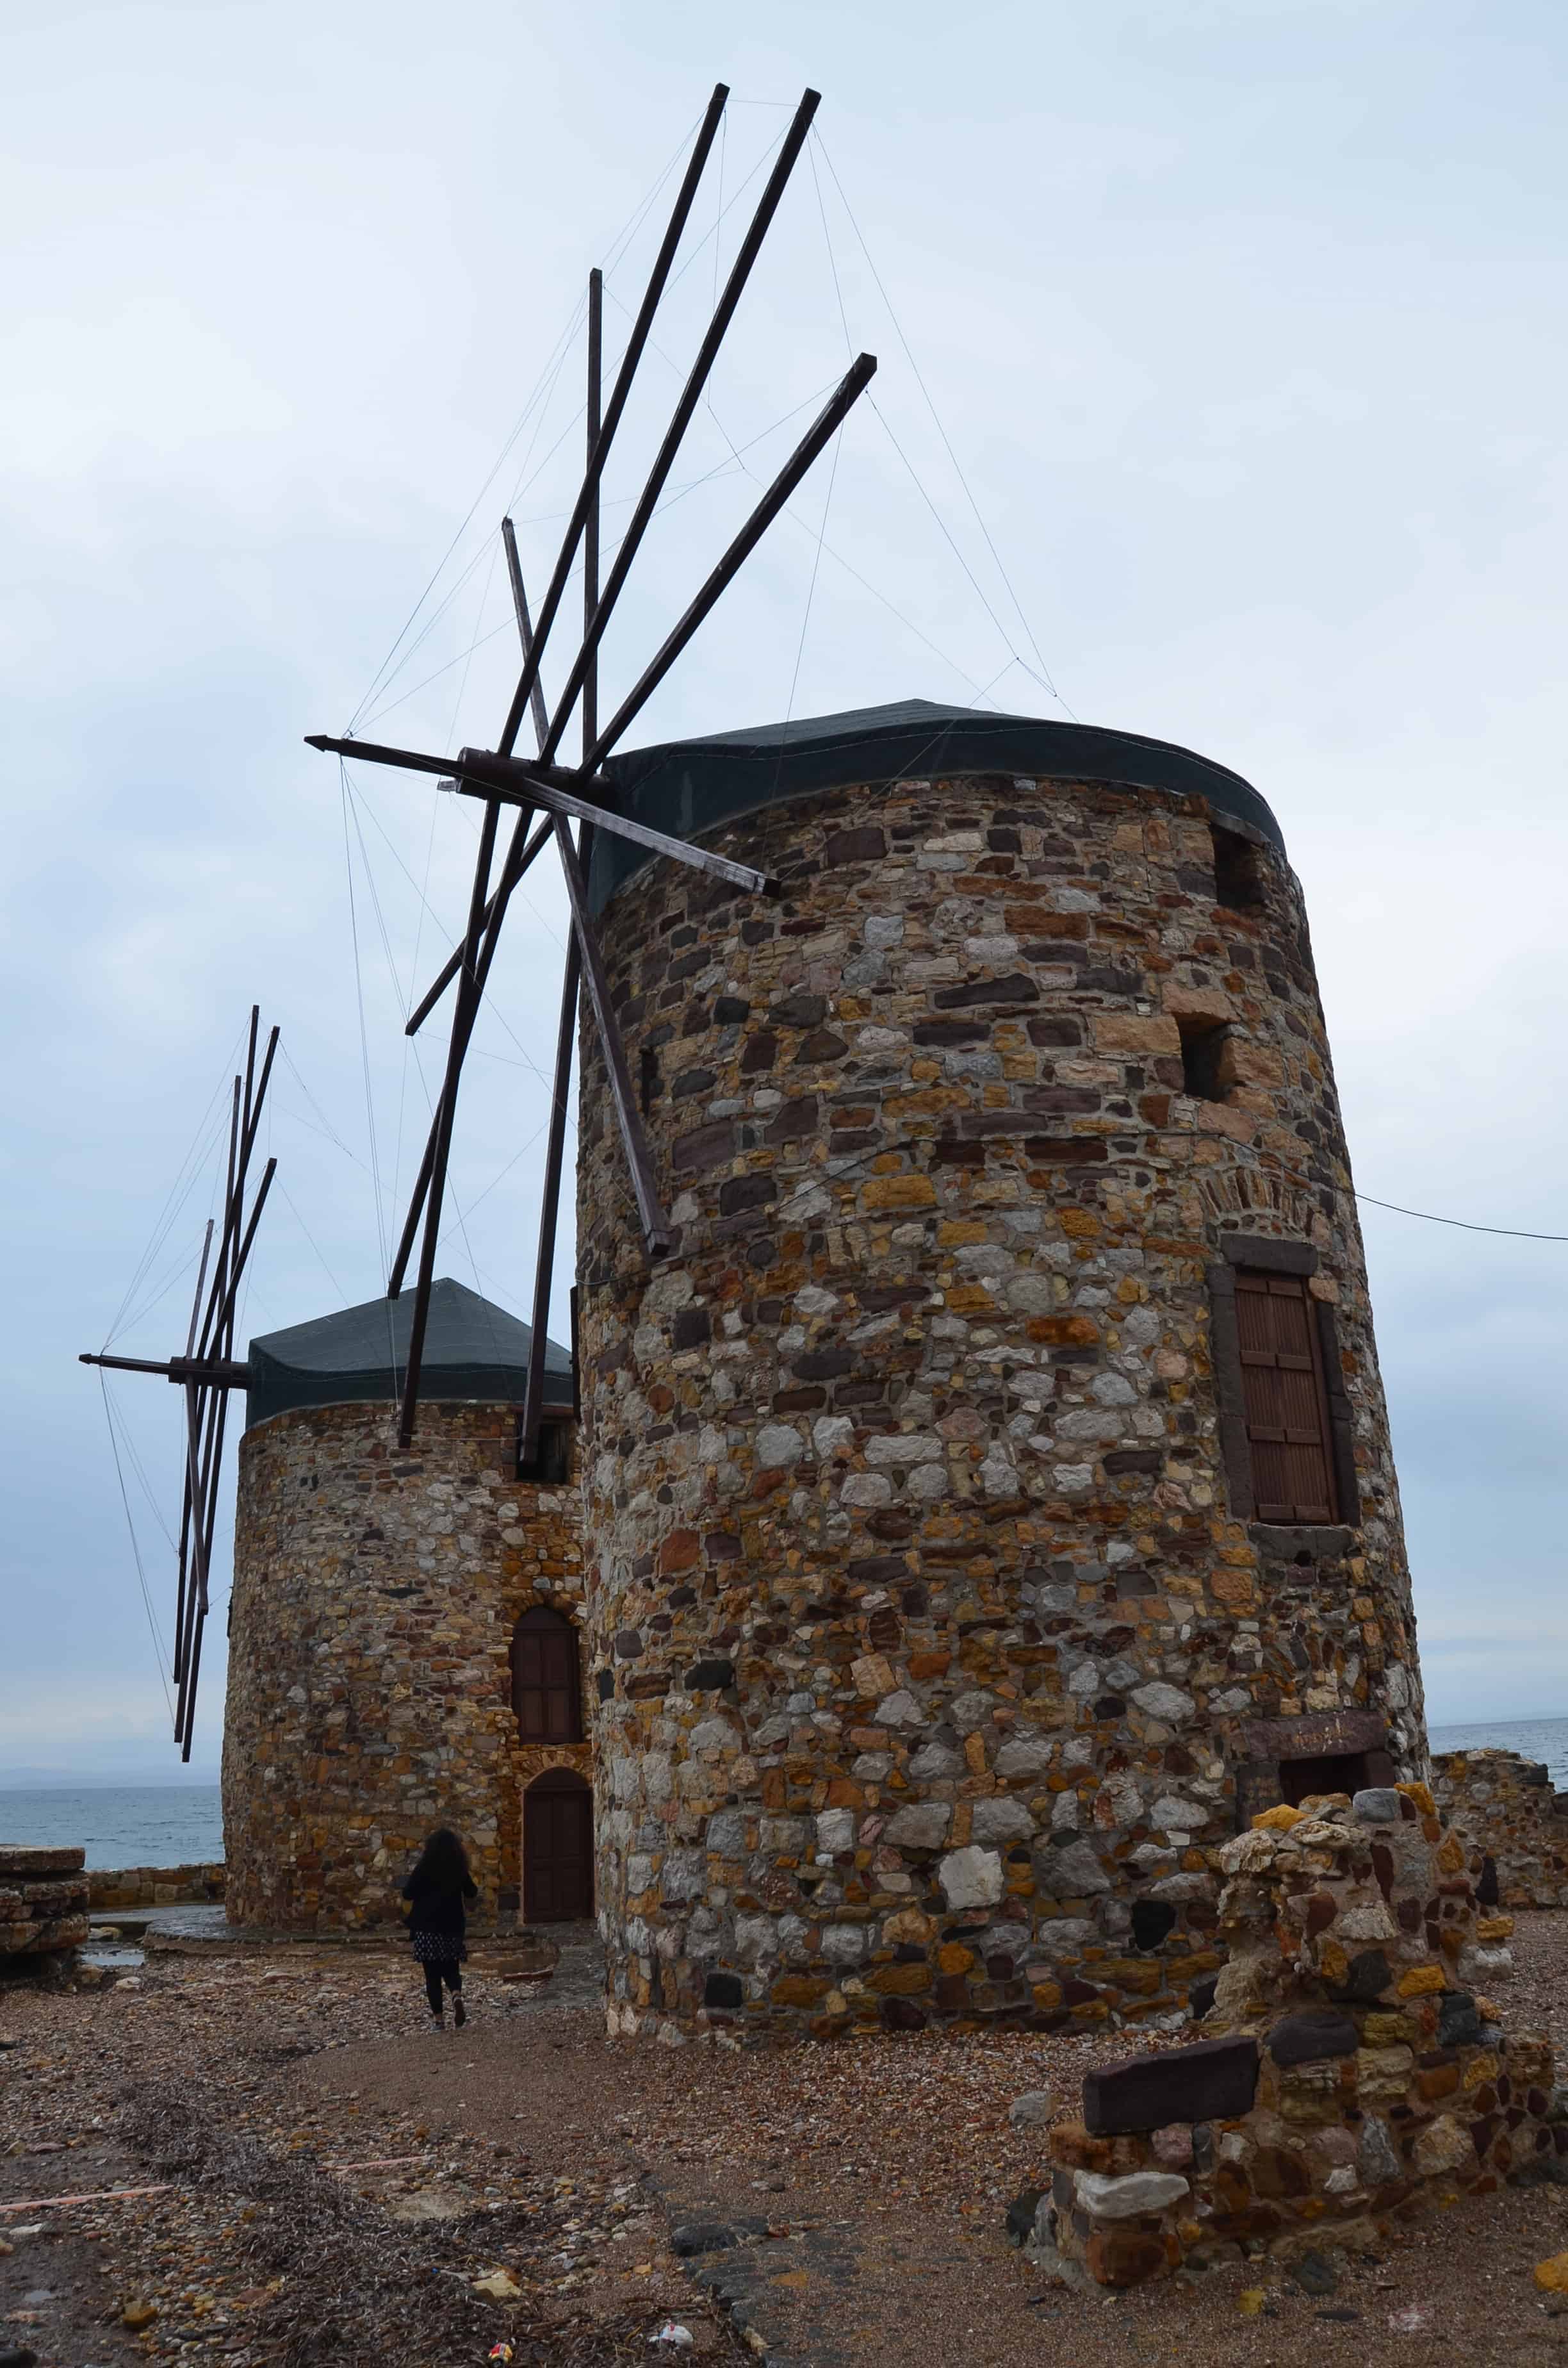 Windmills in Chios, Greece